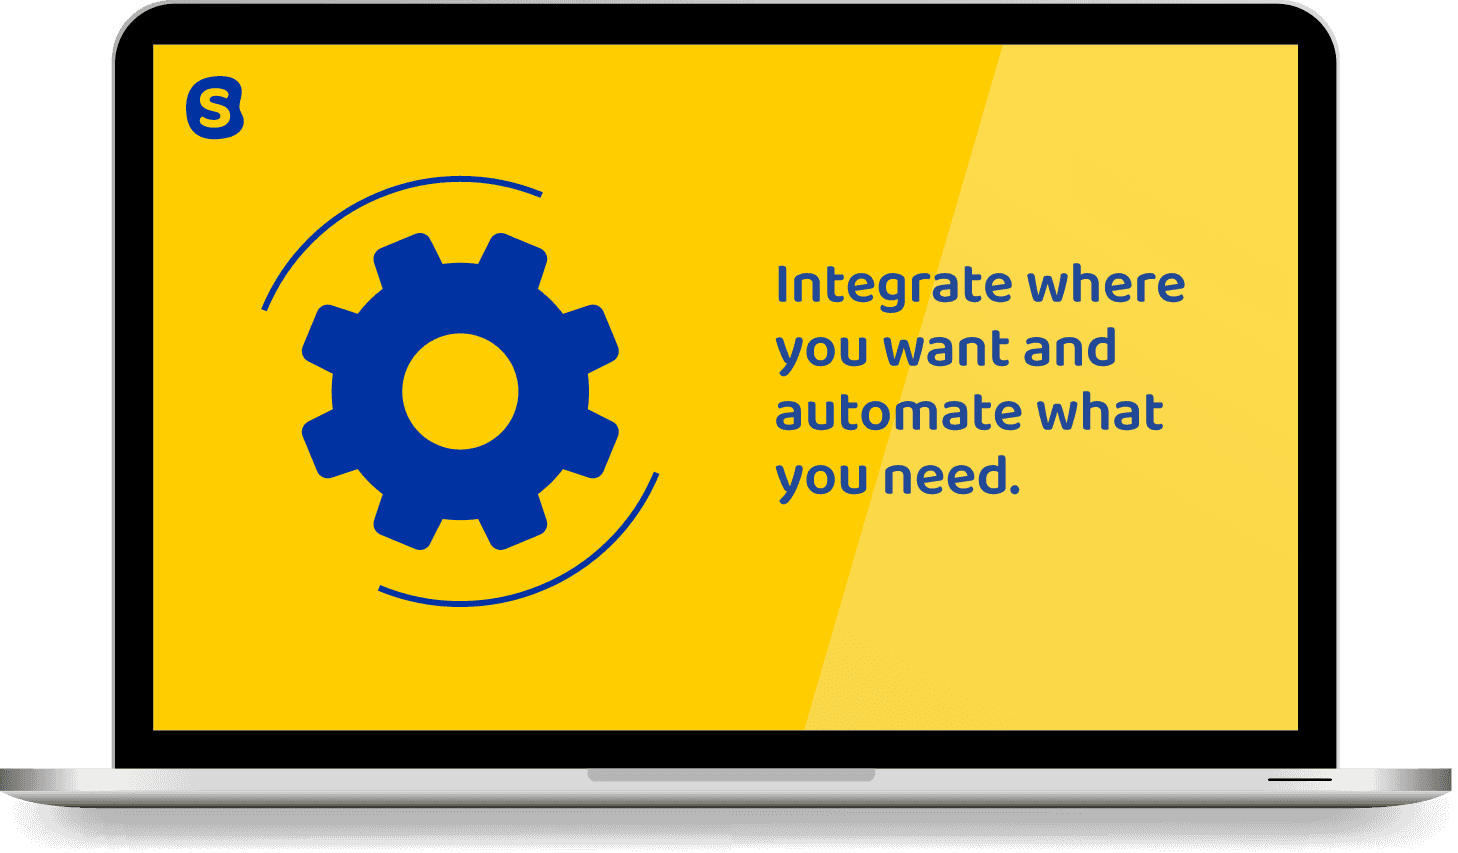 Integrate where you want and automate what you need.